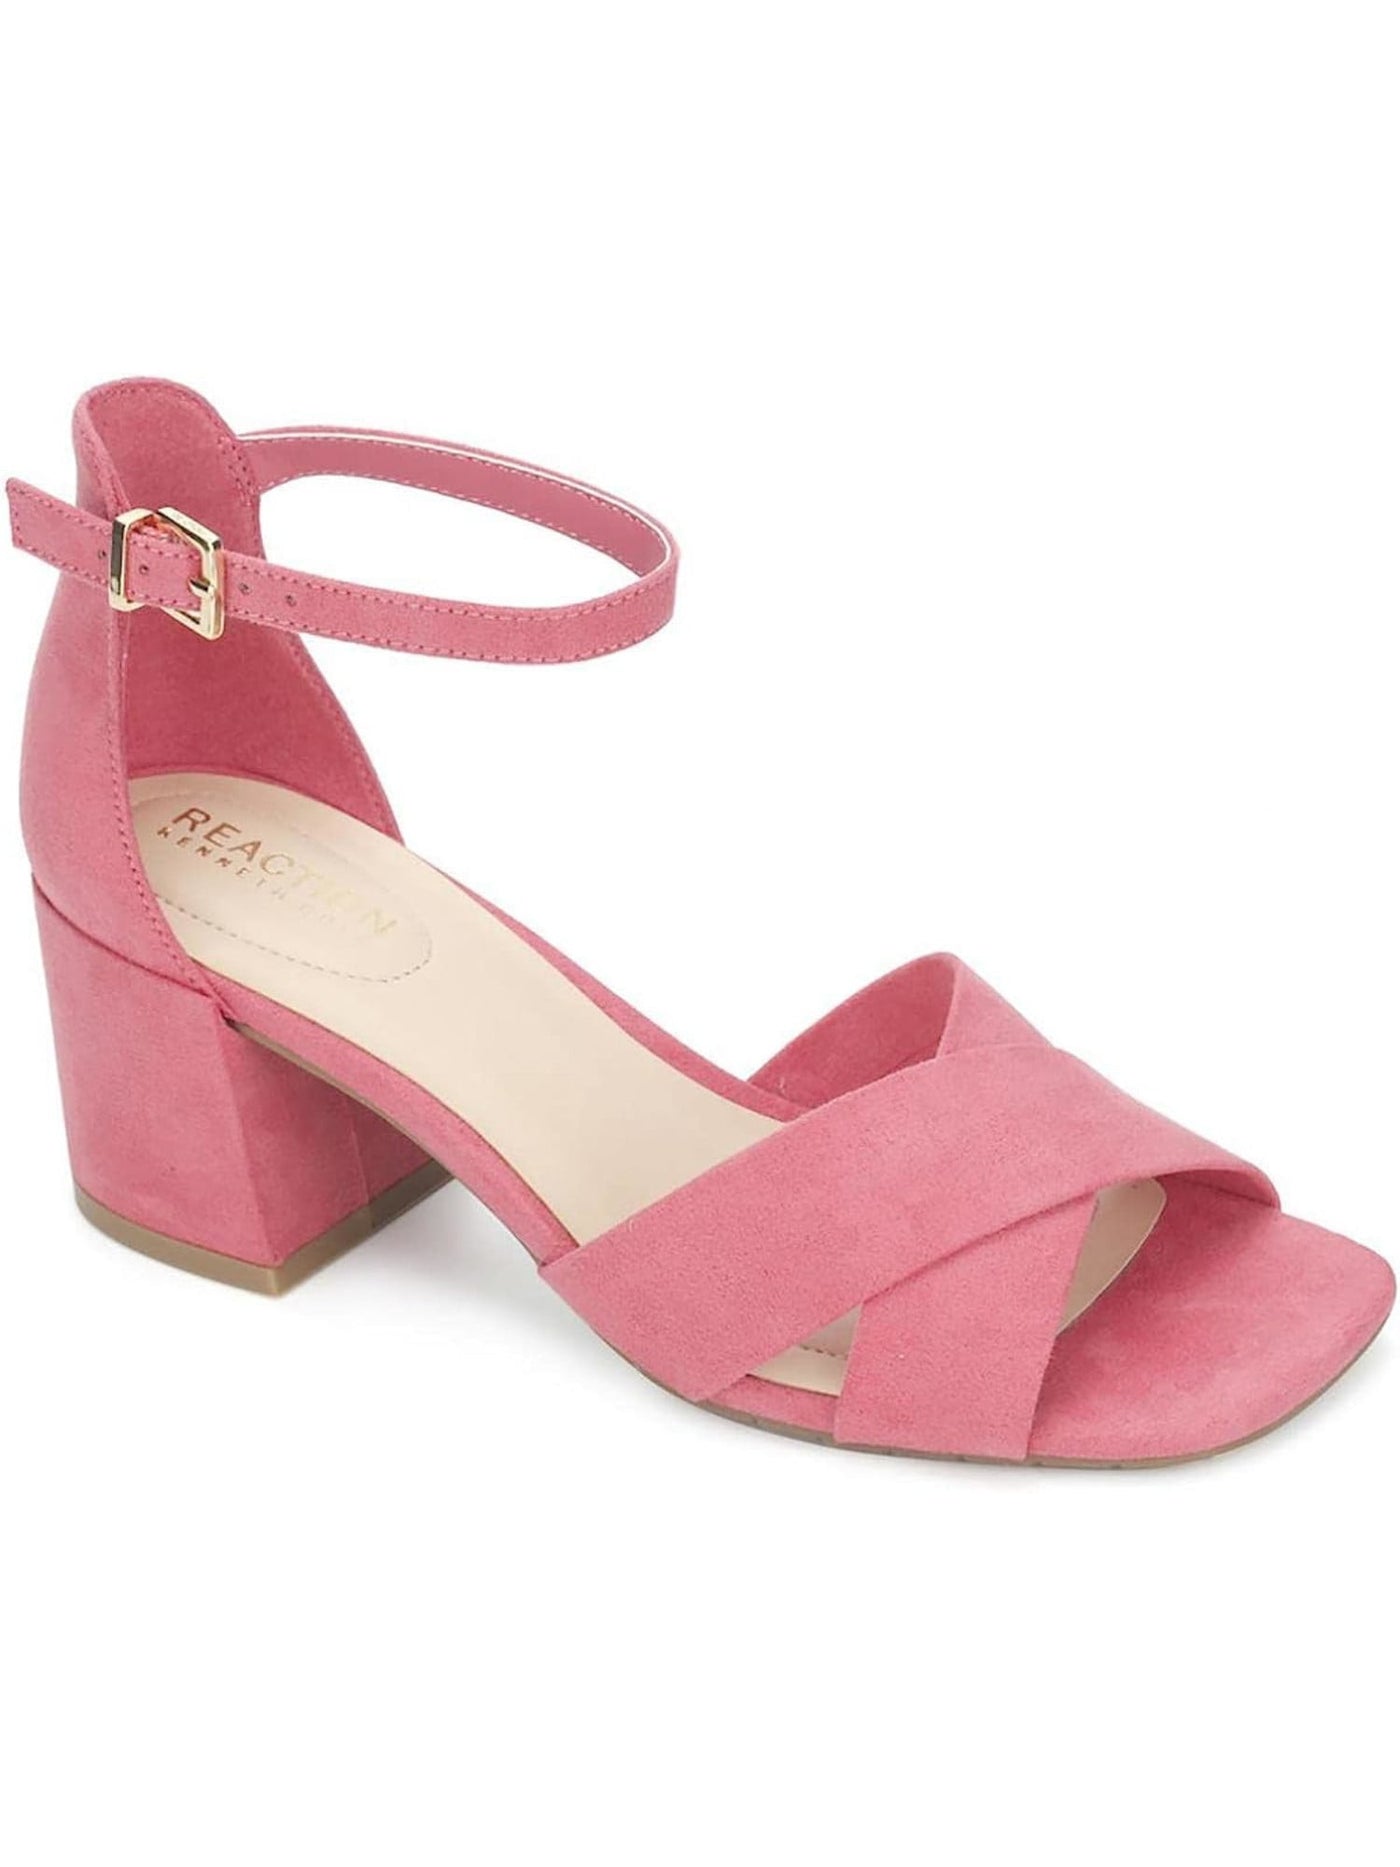 REACTION KENNETH COLE Womens Pink Ankle Strap Padded Mix X-band Square Toe Block Heel Buckle Dress Heeled Sandal 10 M